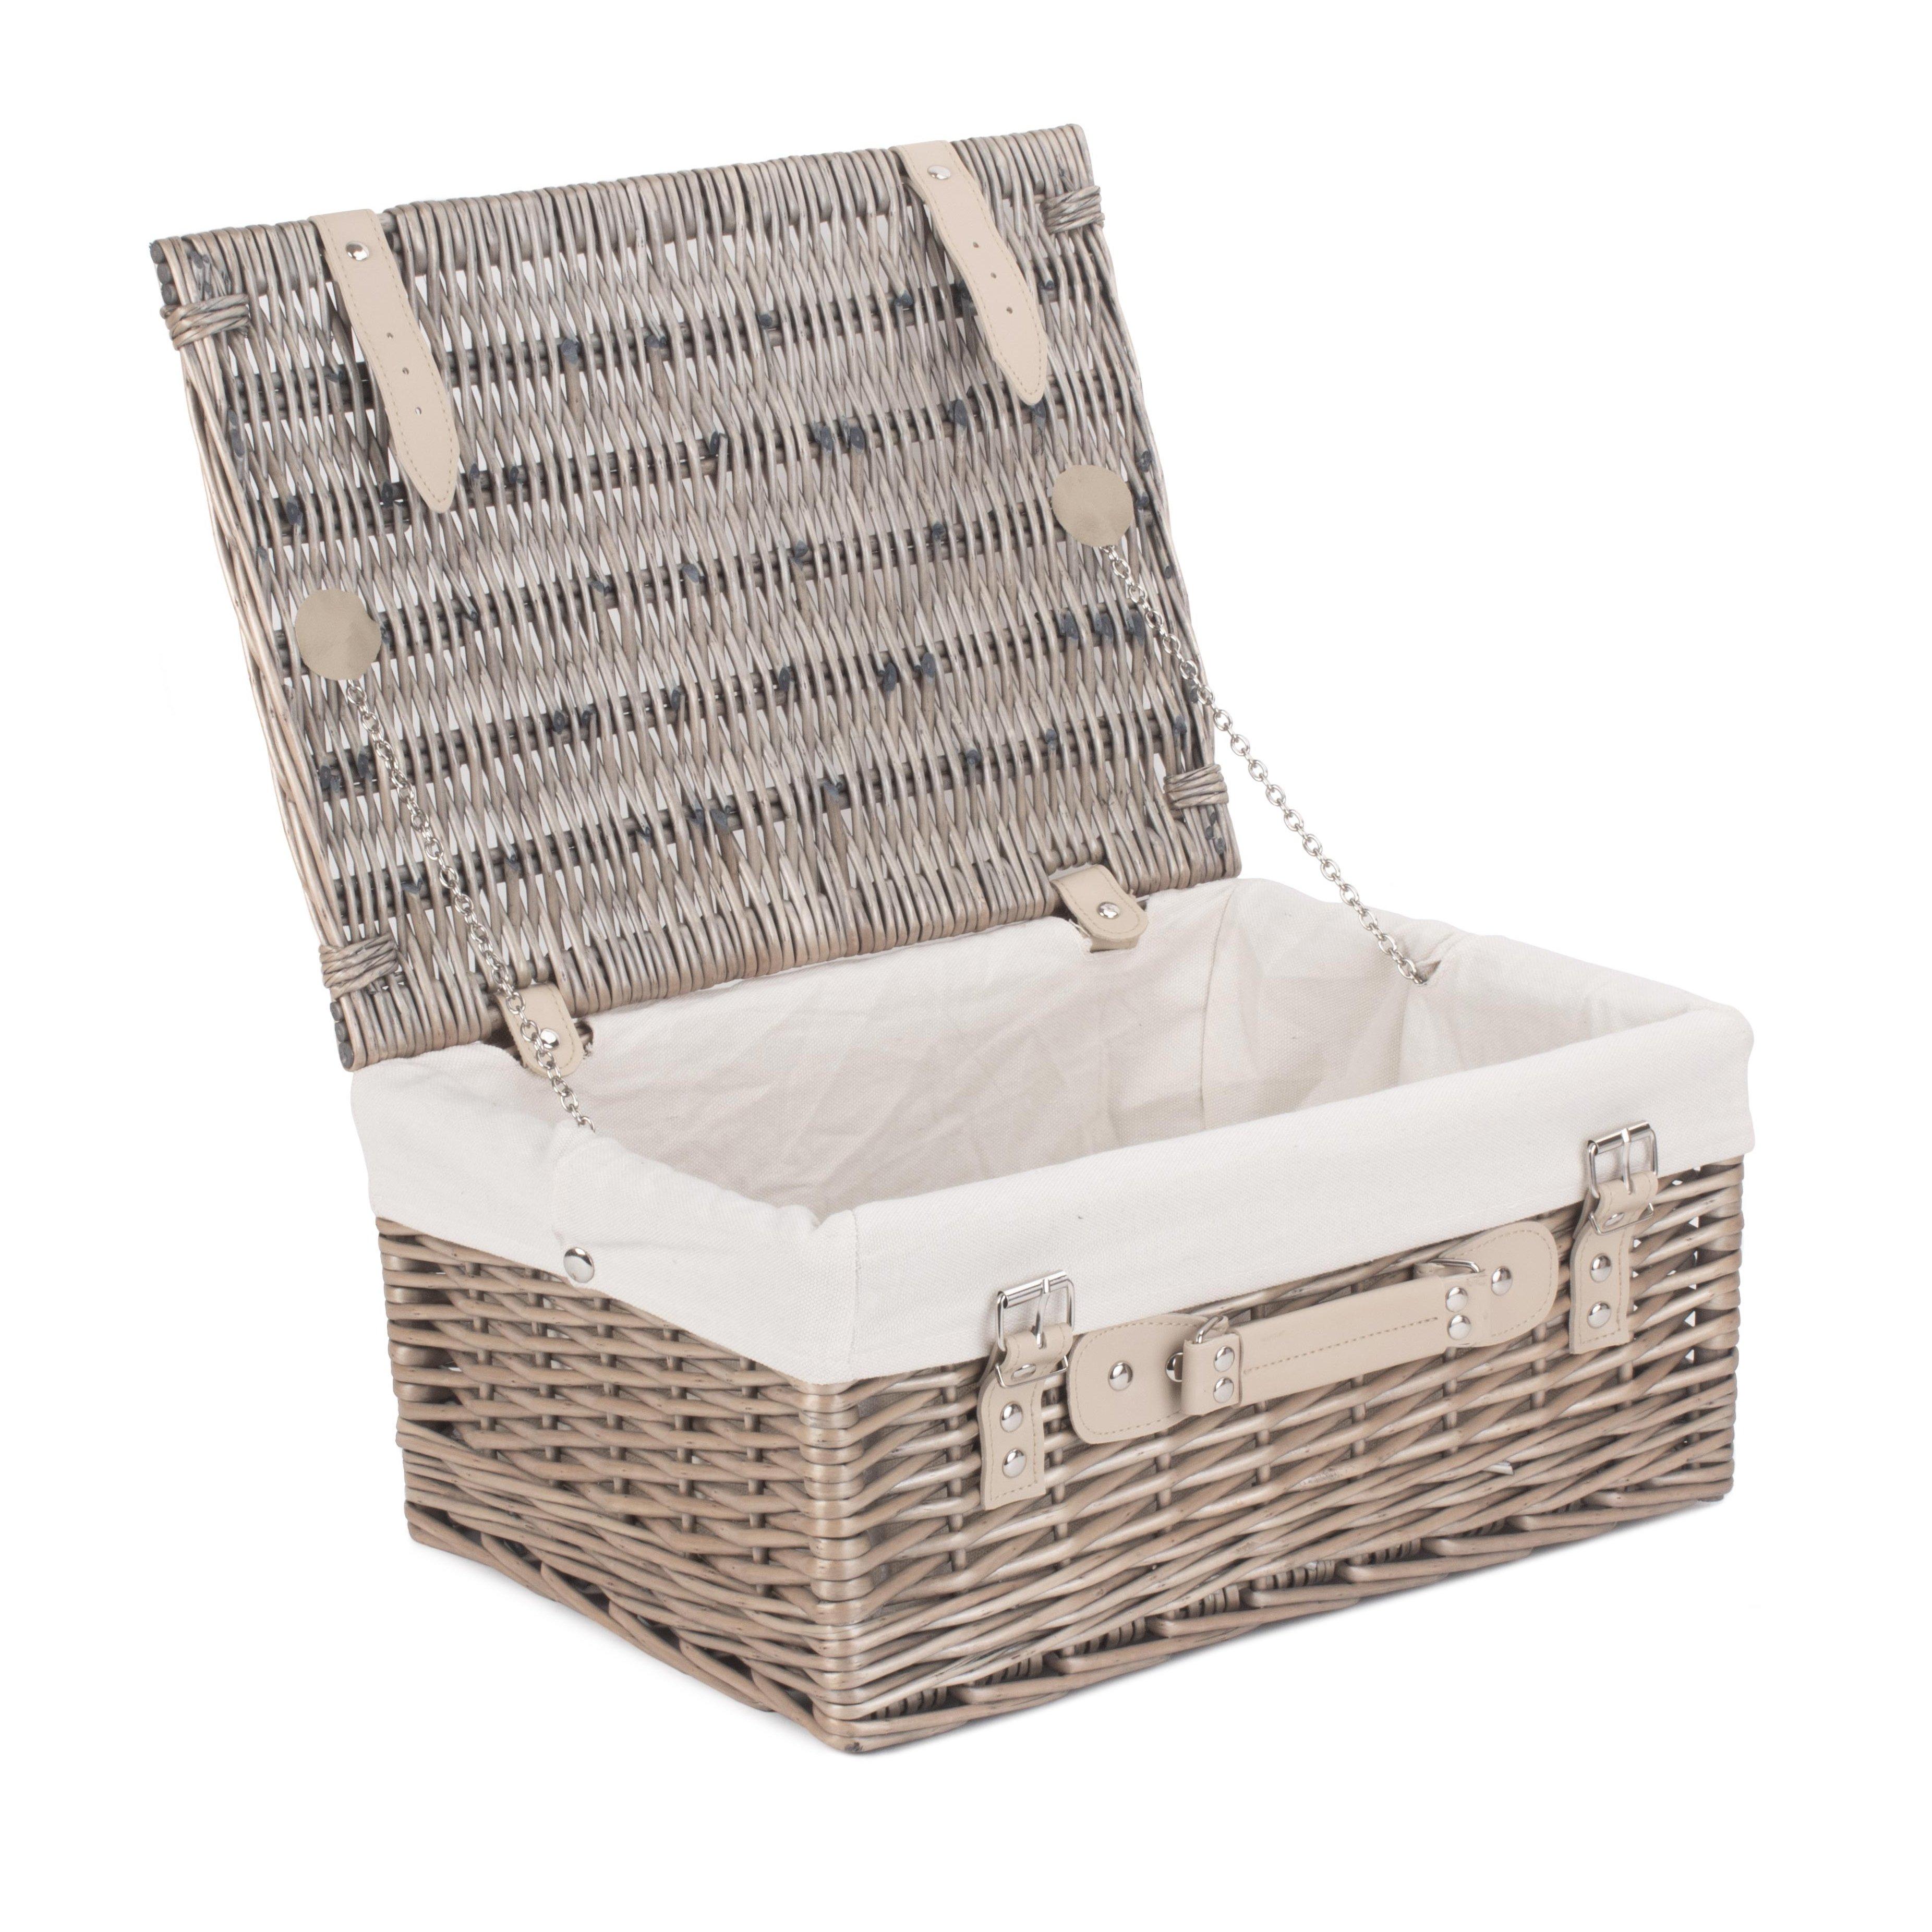 Wicker 40cm Antique Wash Picnic Basket with Cotton Lining